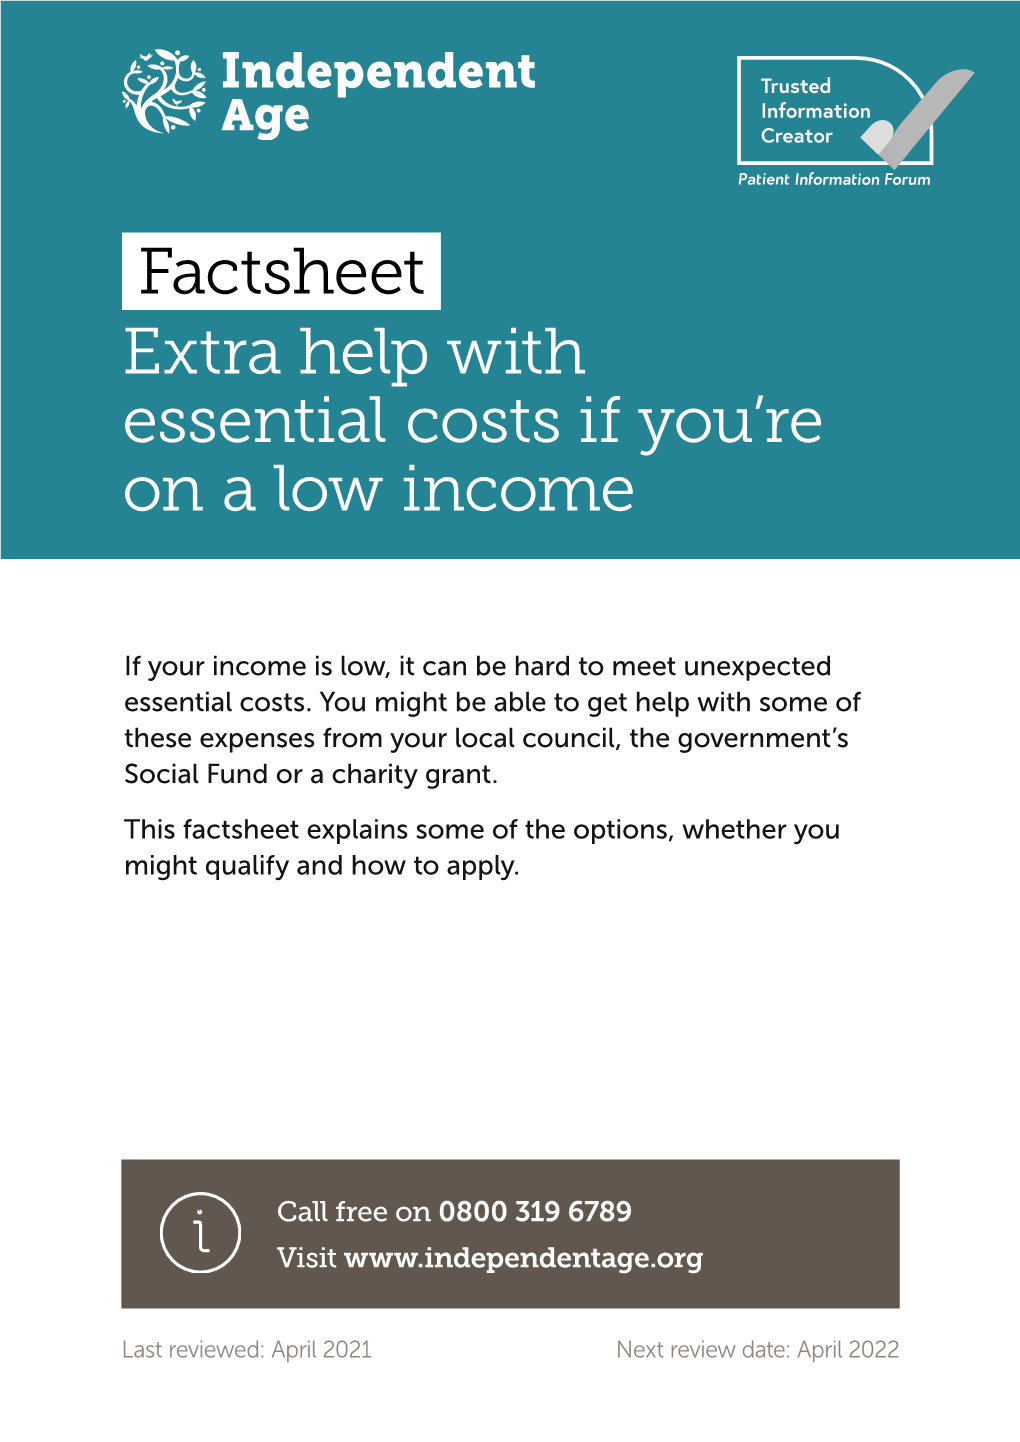 Extra Help with Essential Costs If You're on a Low Income